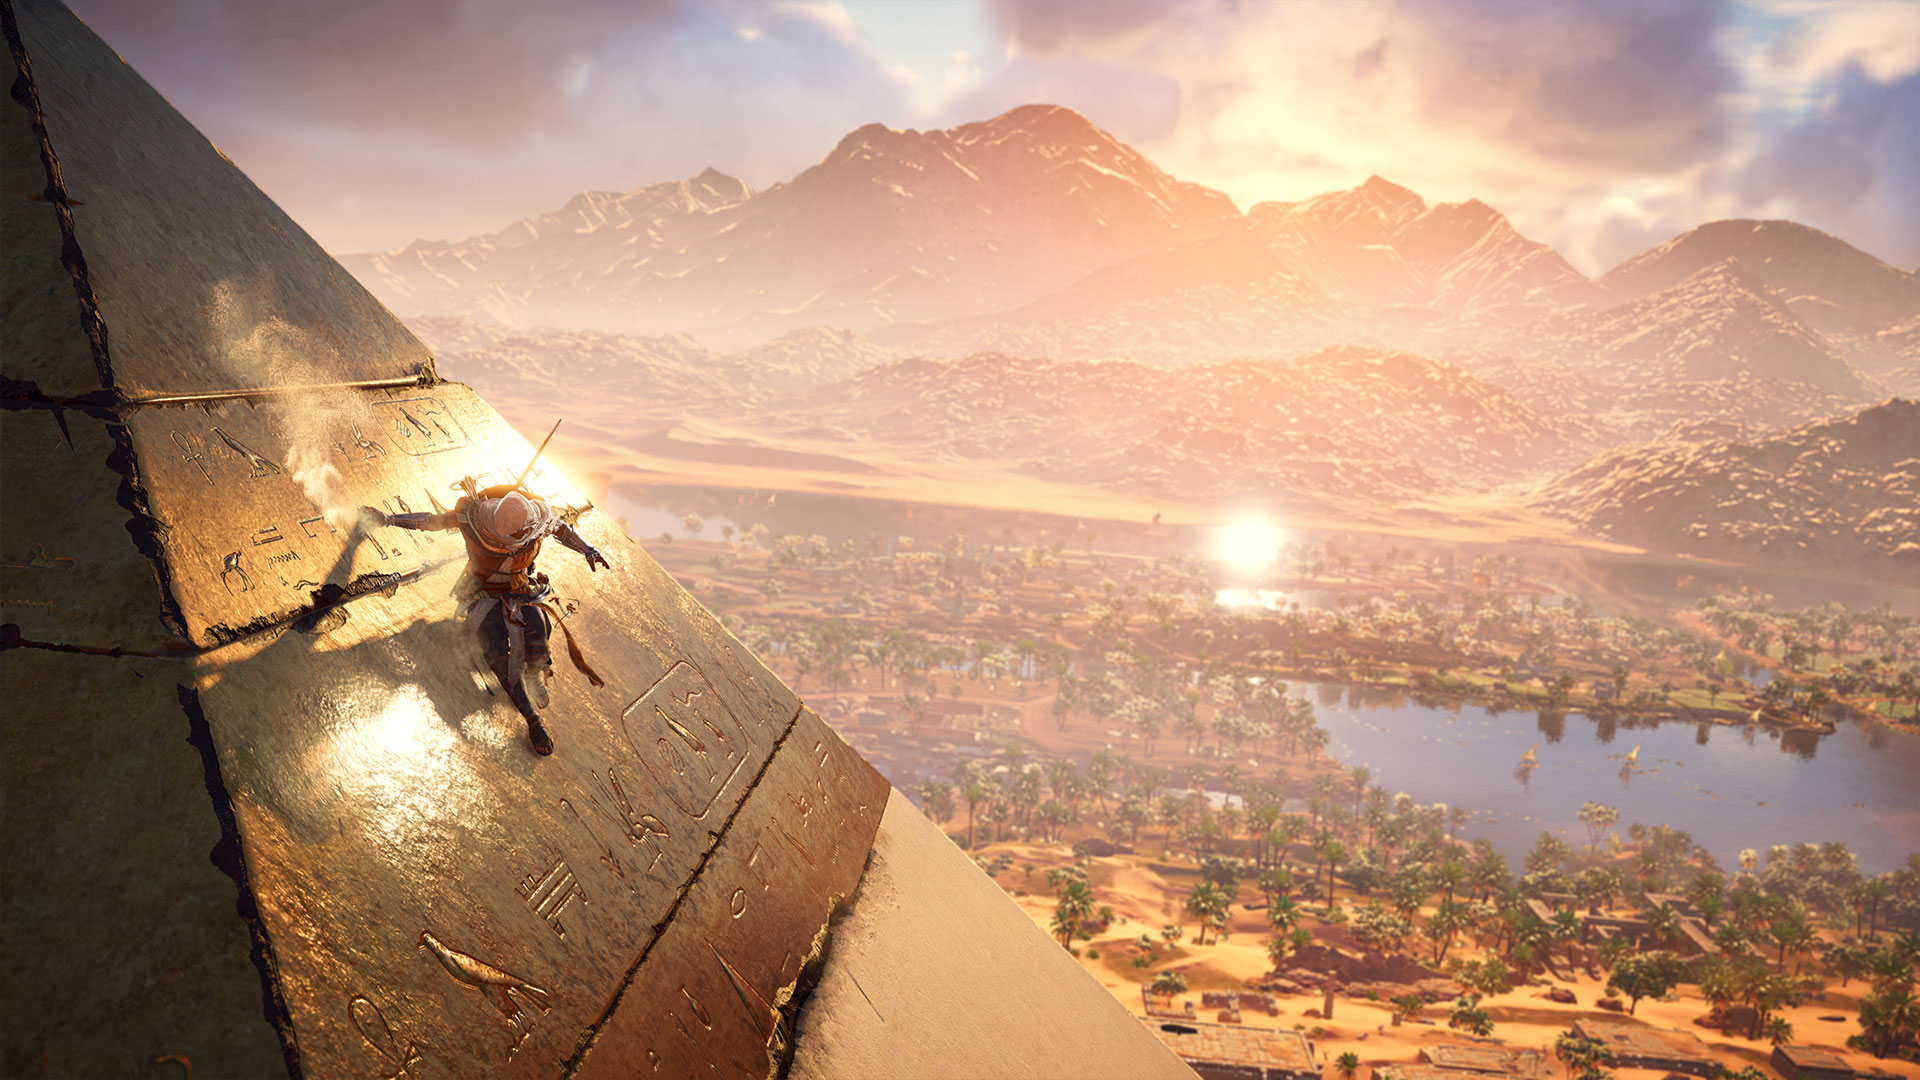 Media asset in full size related to 3dfxzone.it news item entitled as follows: Gameplay trailer in 4K e screenshots in Full HD di Assassin's Creed Origins | Image Name: news26543_Assassin-s-Creed-Origins-Screenshot_1.jpg